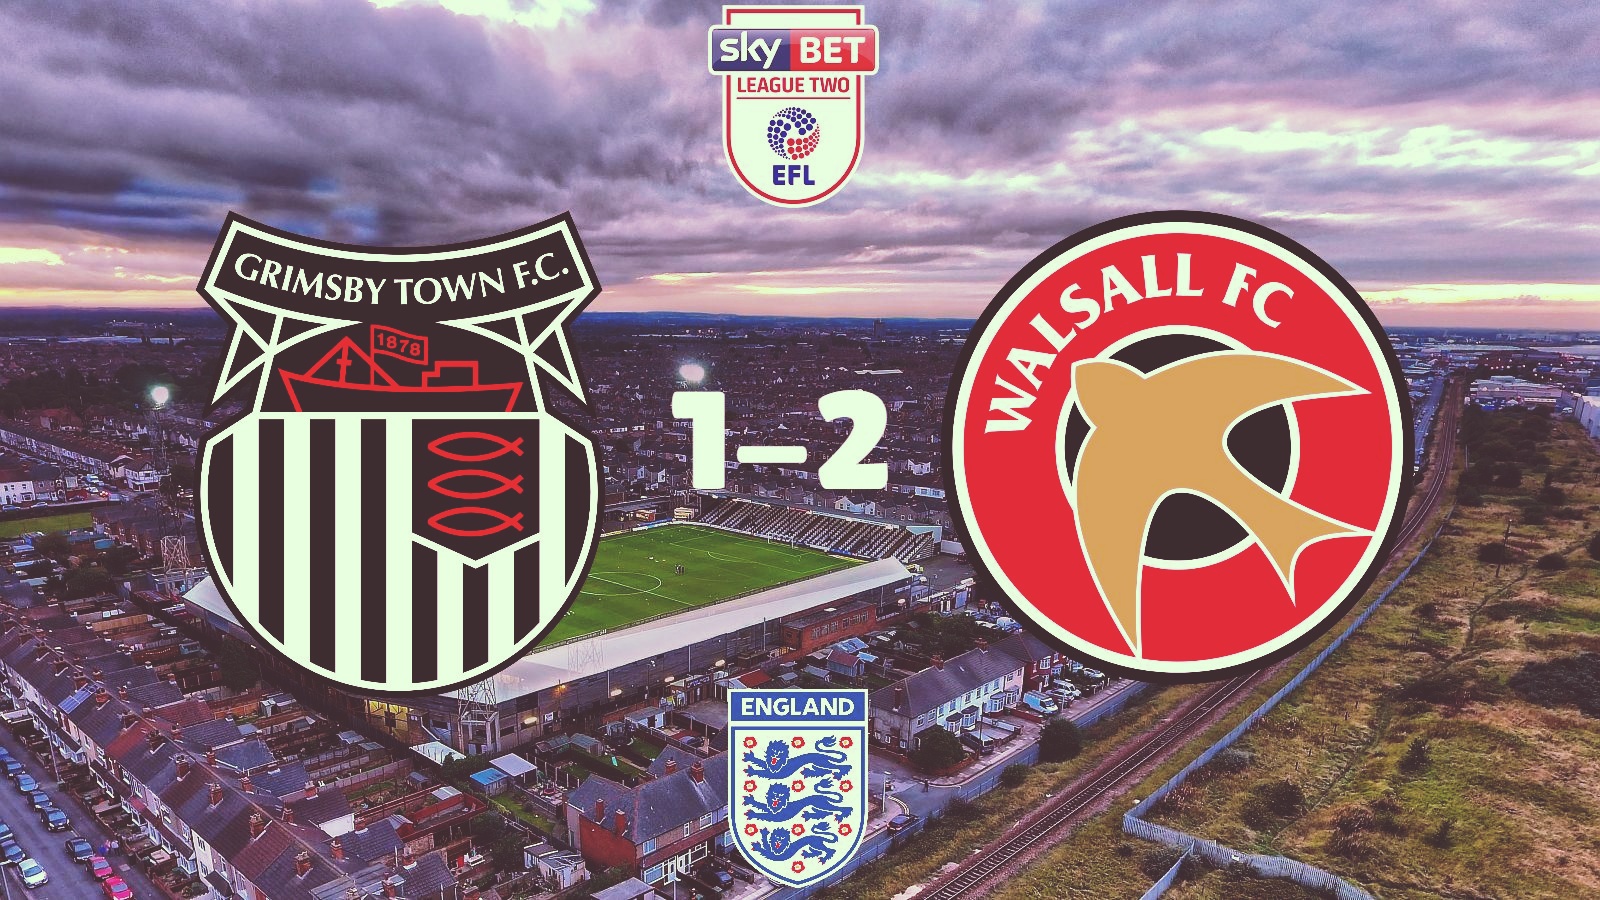 EFL.Ligue Two. День матча 12. Grimsby Town 1-2 Walsall.